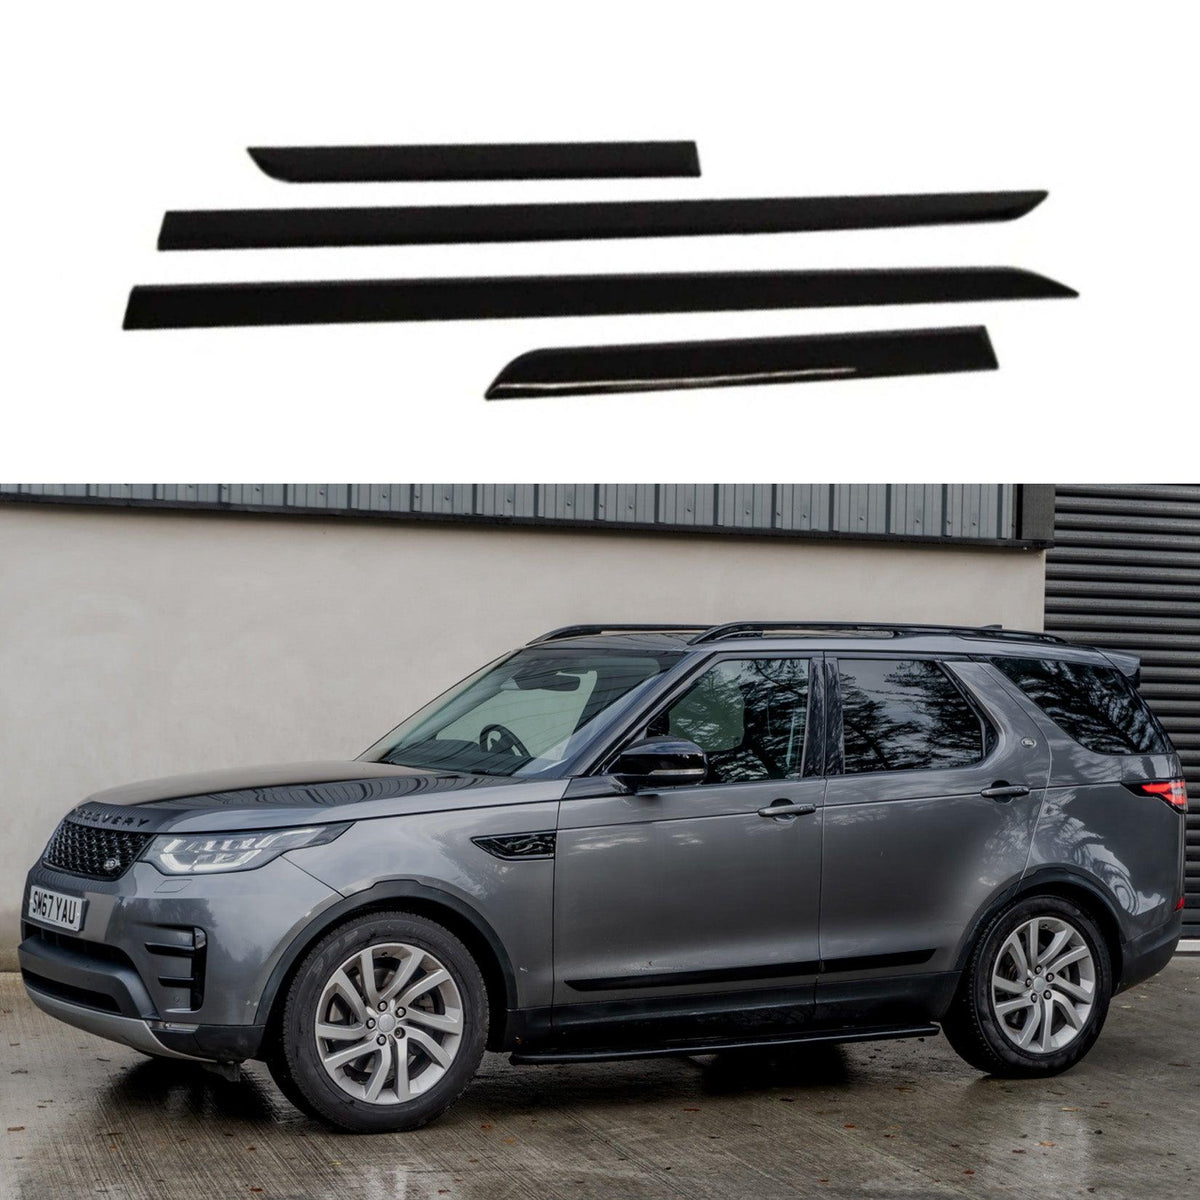 LAND ROVER DISCOVERY 5 2017 ON - DYNAMIC DOOR MOULDINGS SIDE TRIM - BLACK - Storm Xccessories